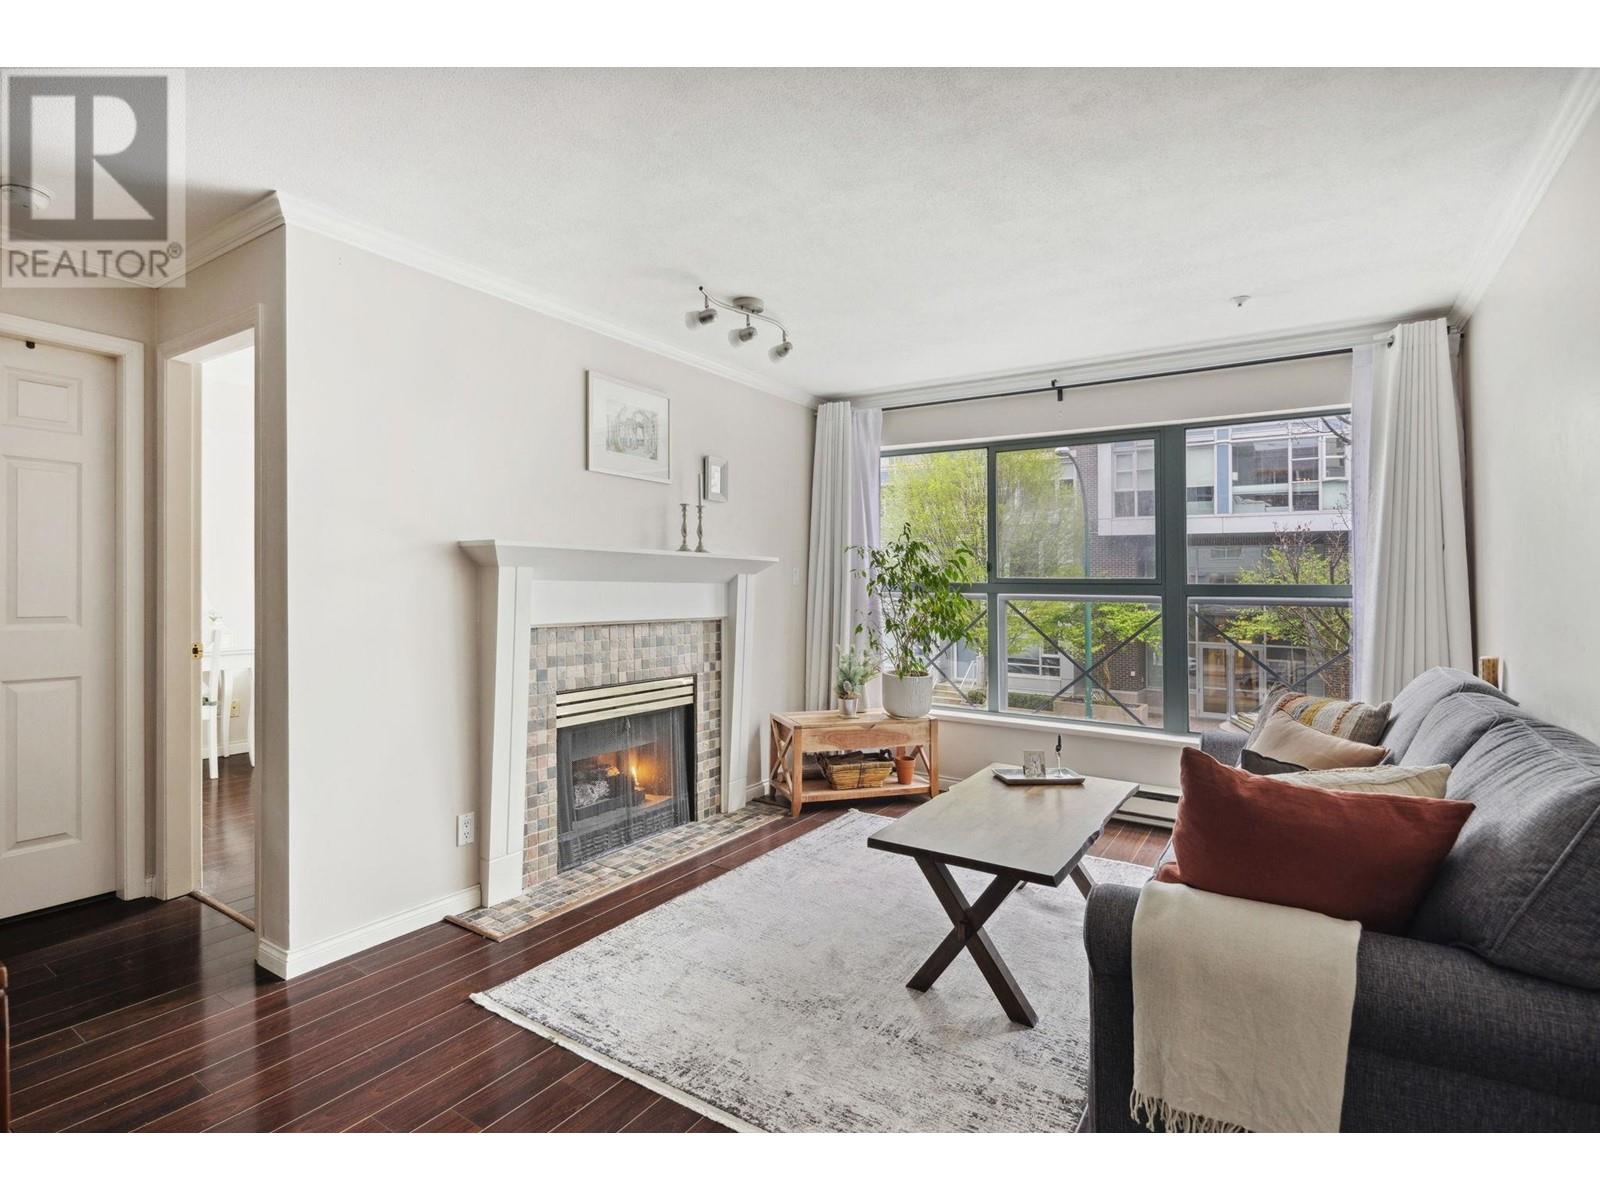 Listing Picture 4 of 24 : 210 511 W 7TH AVENUE, Vancouver / 溫哥華 - 魯藝地產 Yvonne Lu Group - MLS Medallion Club Member